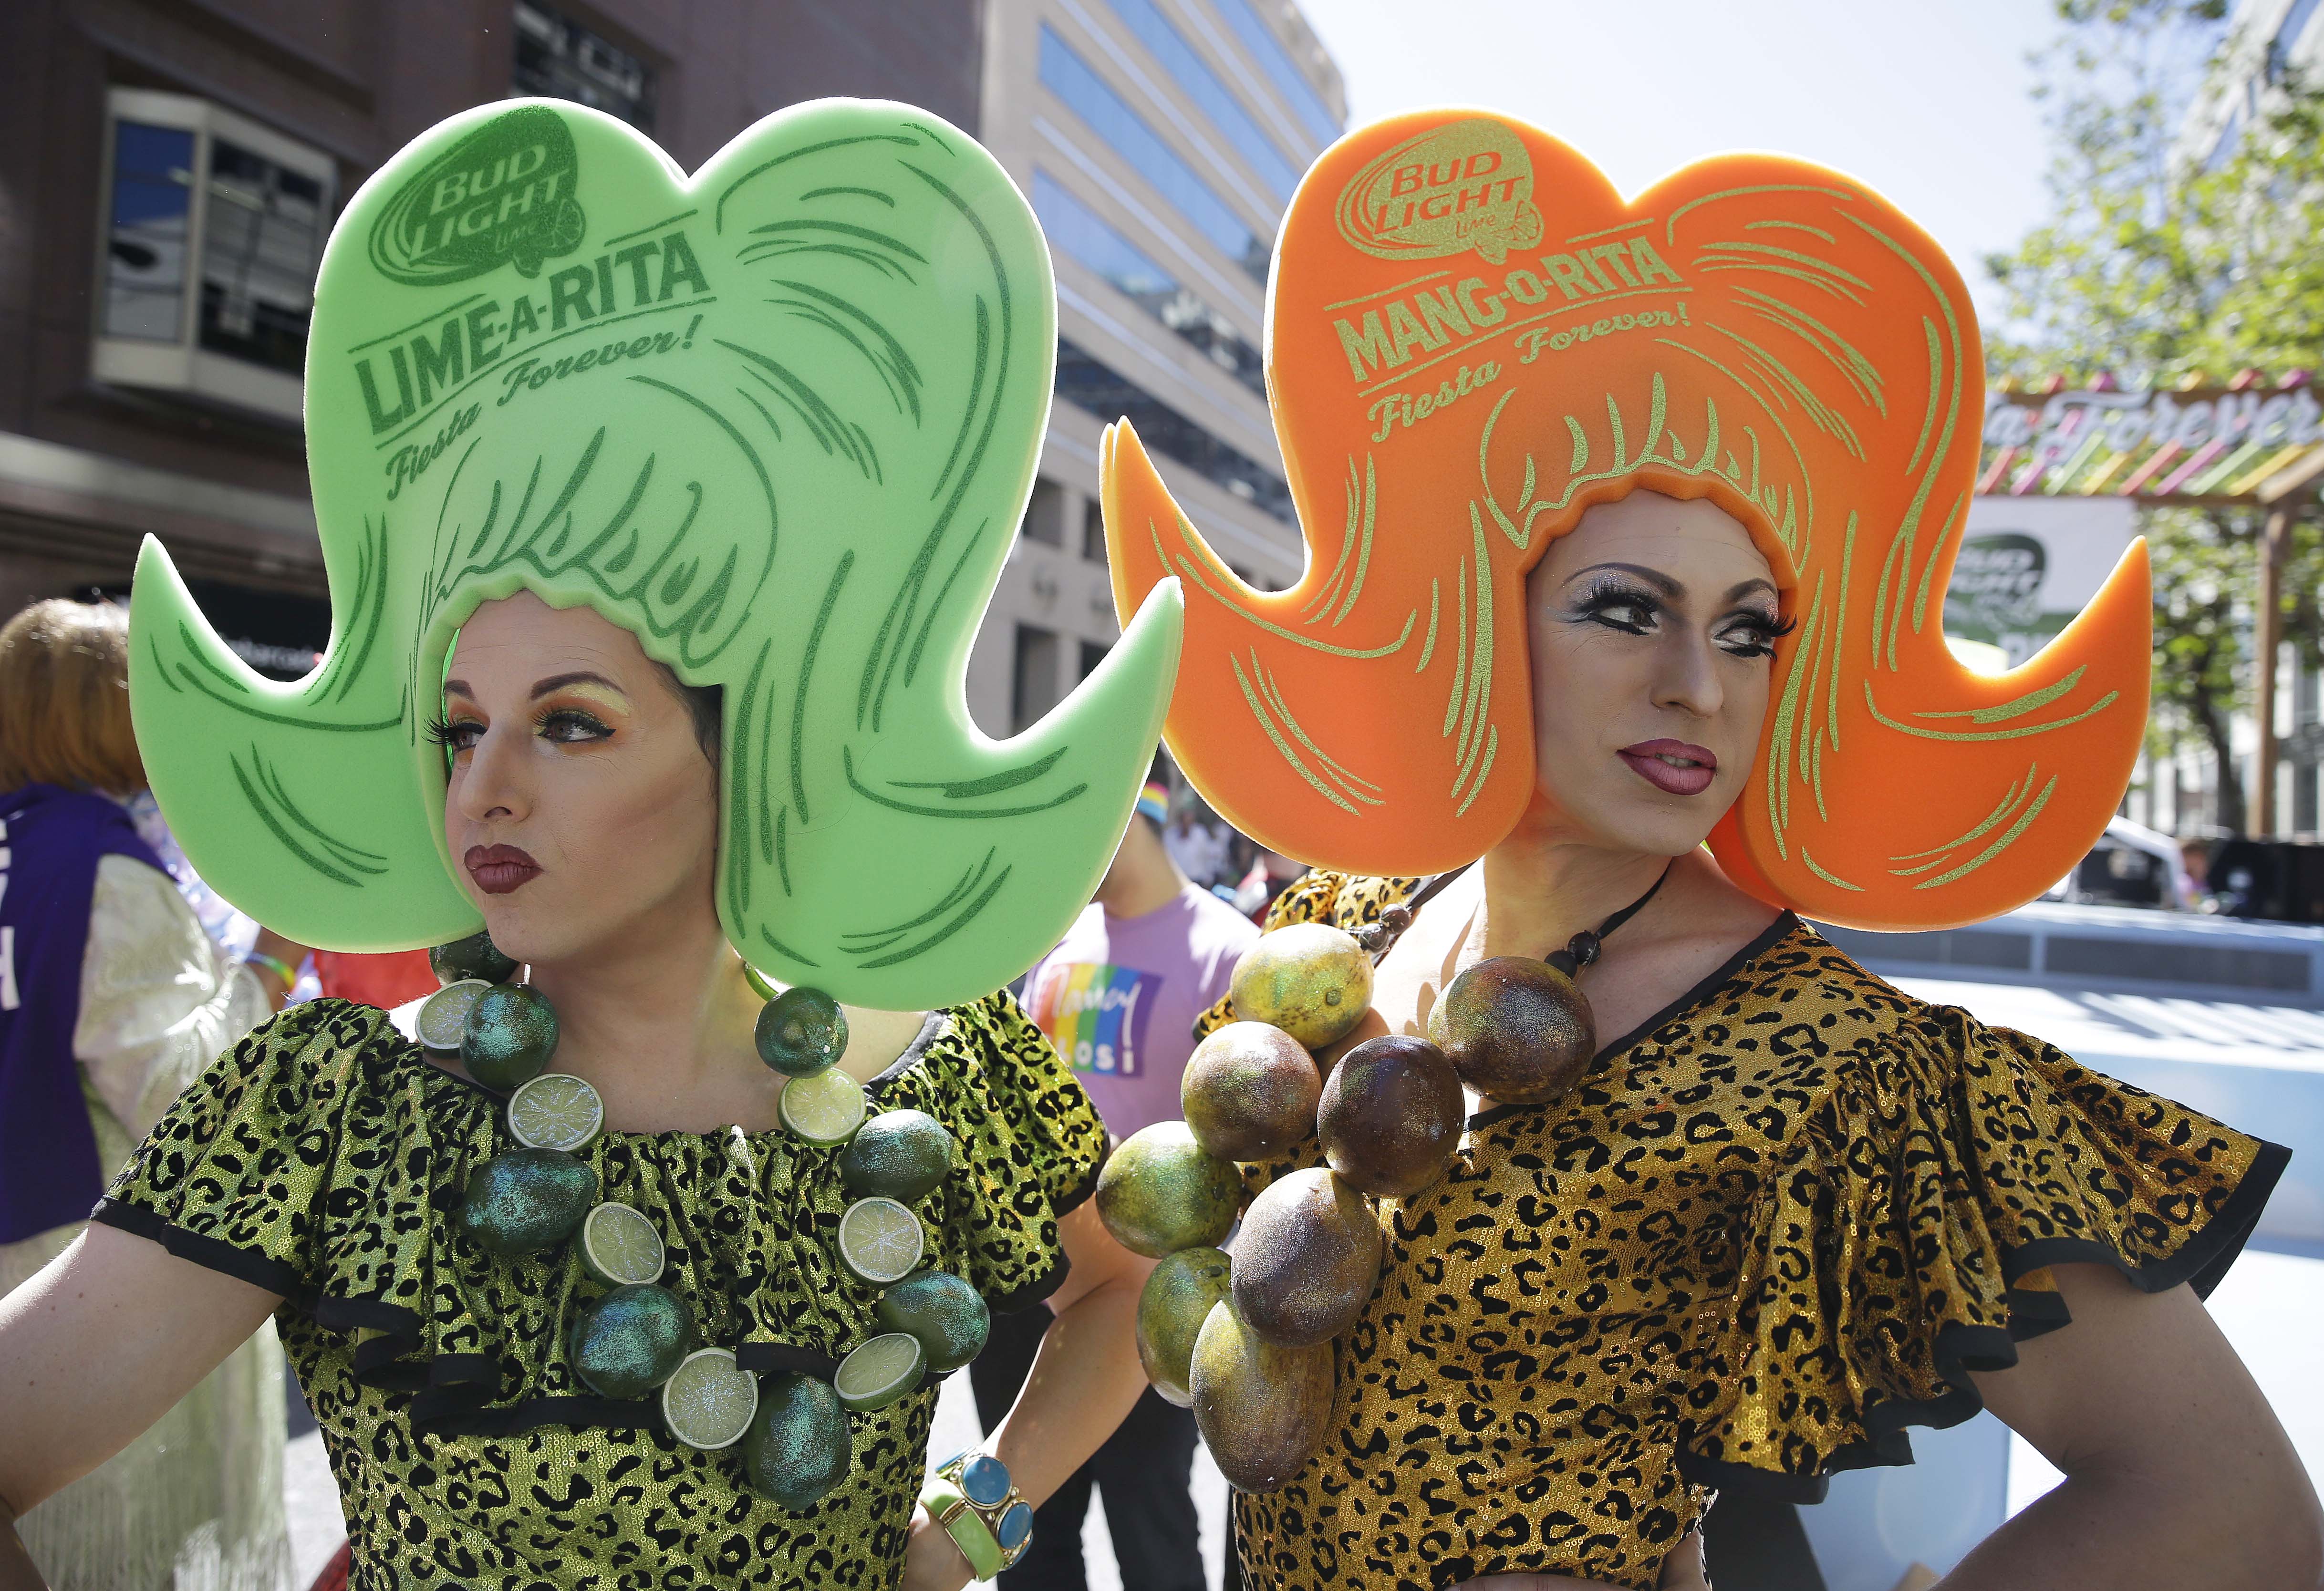 LeMay, left, dressed as Lime A Rita and Darcy Drollinger, right, dressed as Mang O Rita, wait by their float for the start of the 44th annual San Francisco Gay Pride parade Sunday, June 29, 2014, in San Francisco.